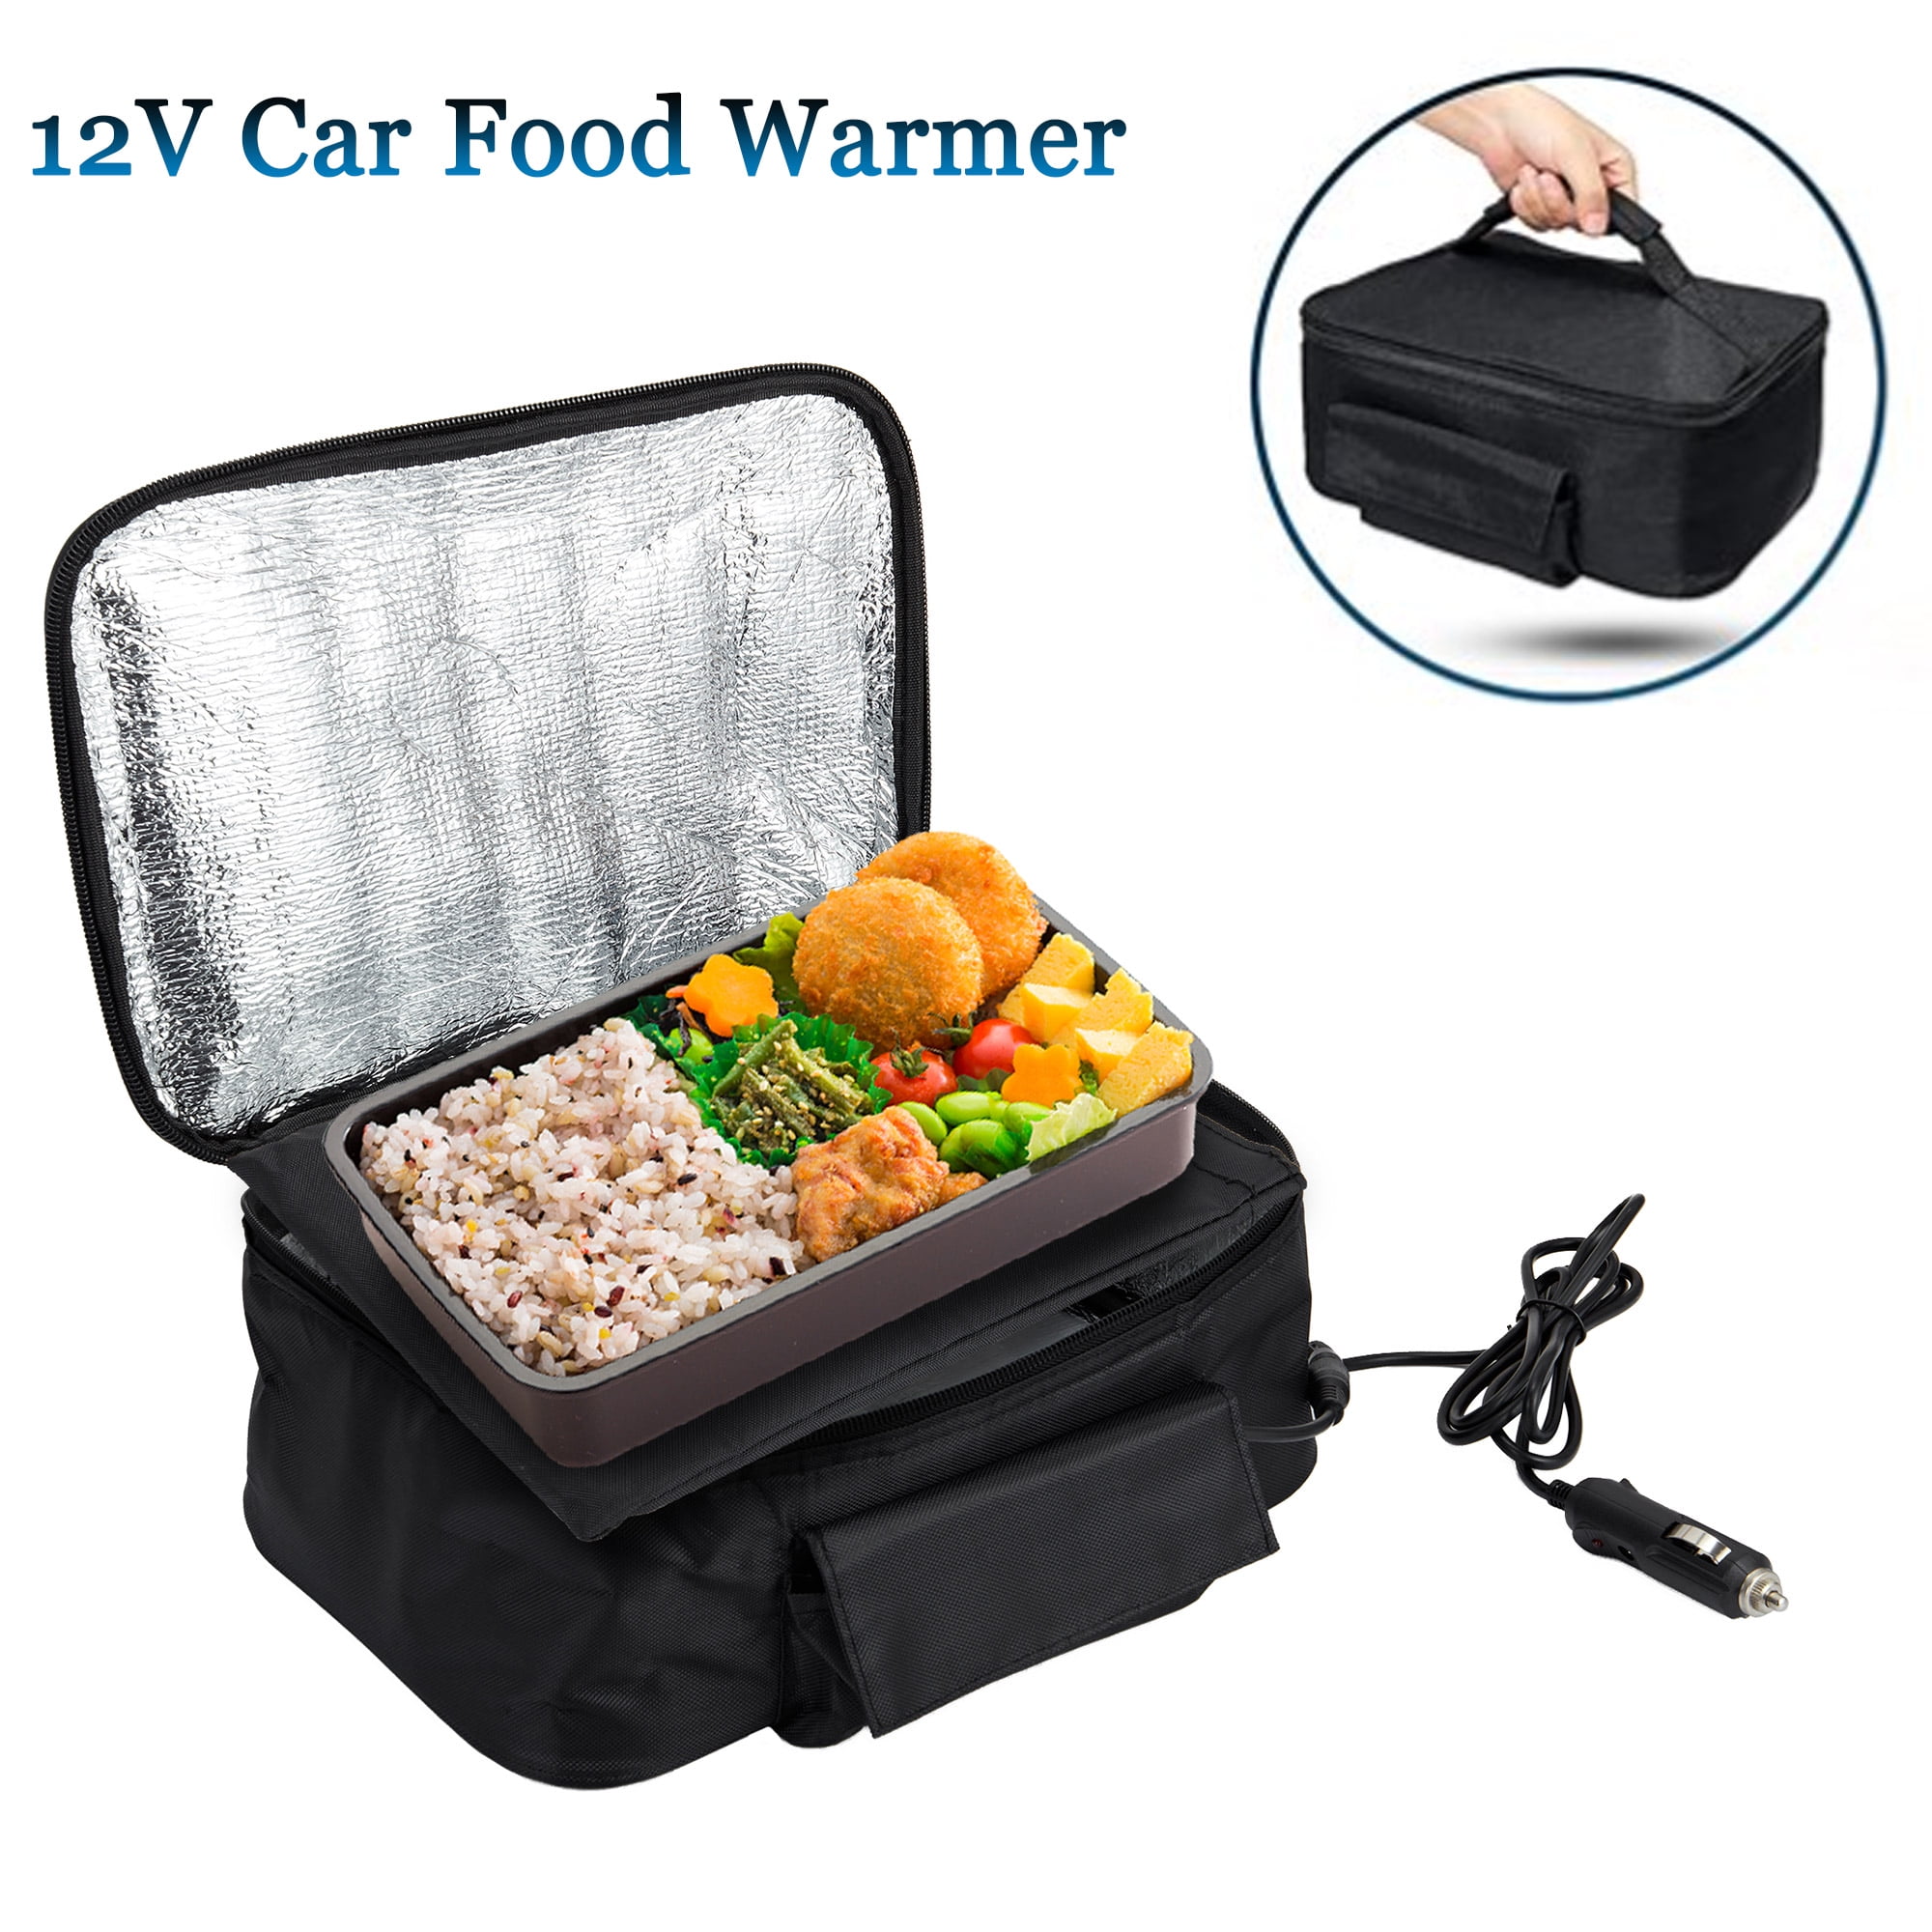 Portable Electric Slow Cooker For Food Warmers Mini Oven Meals Reheat Lunch box 